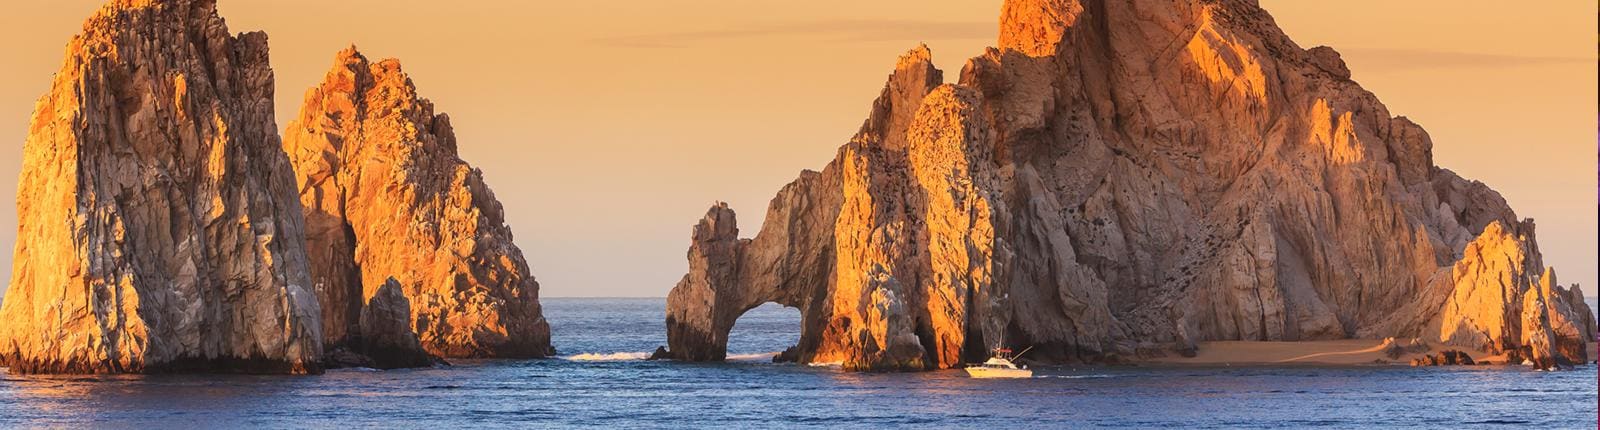 Beautiful view of complex rock formations in the blue oceans of Cabo San Lucas, Mexico